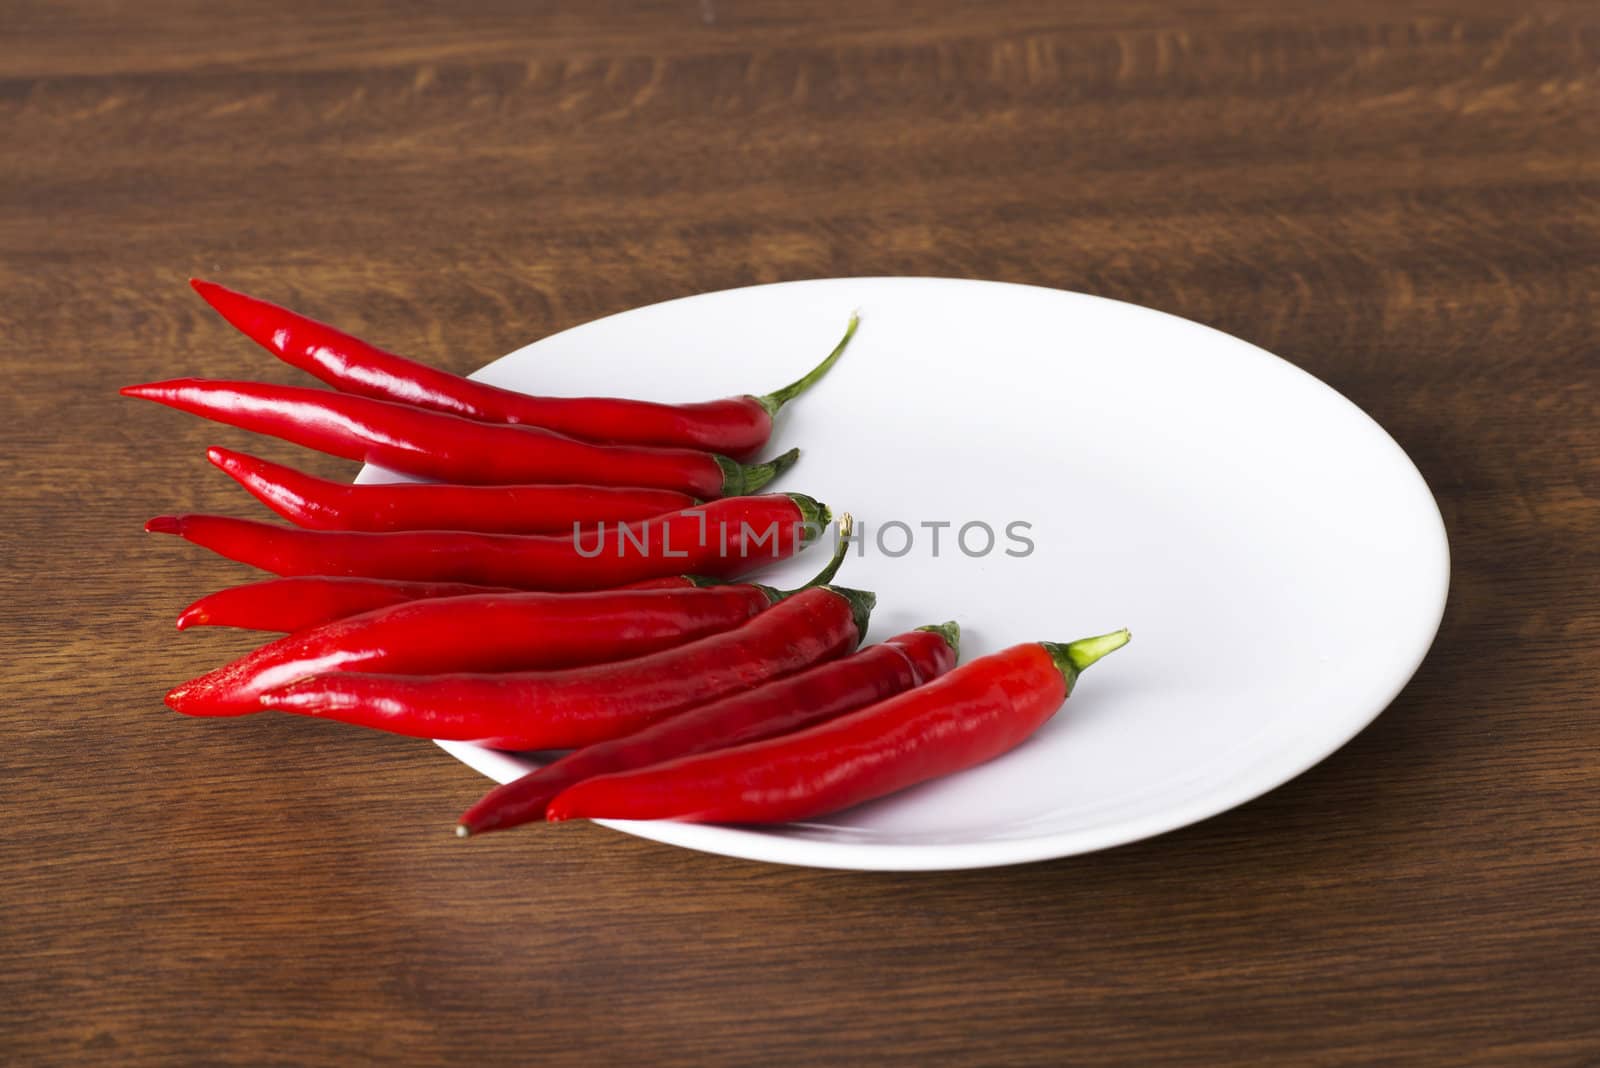 Red hot chilie pepers on plate